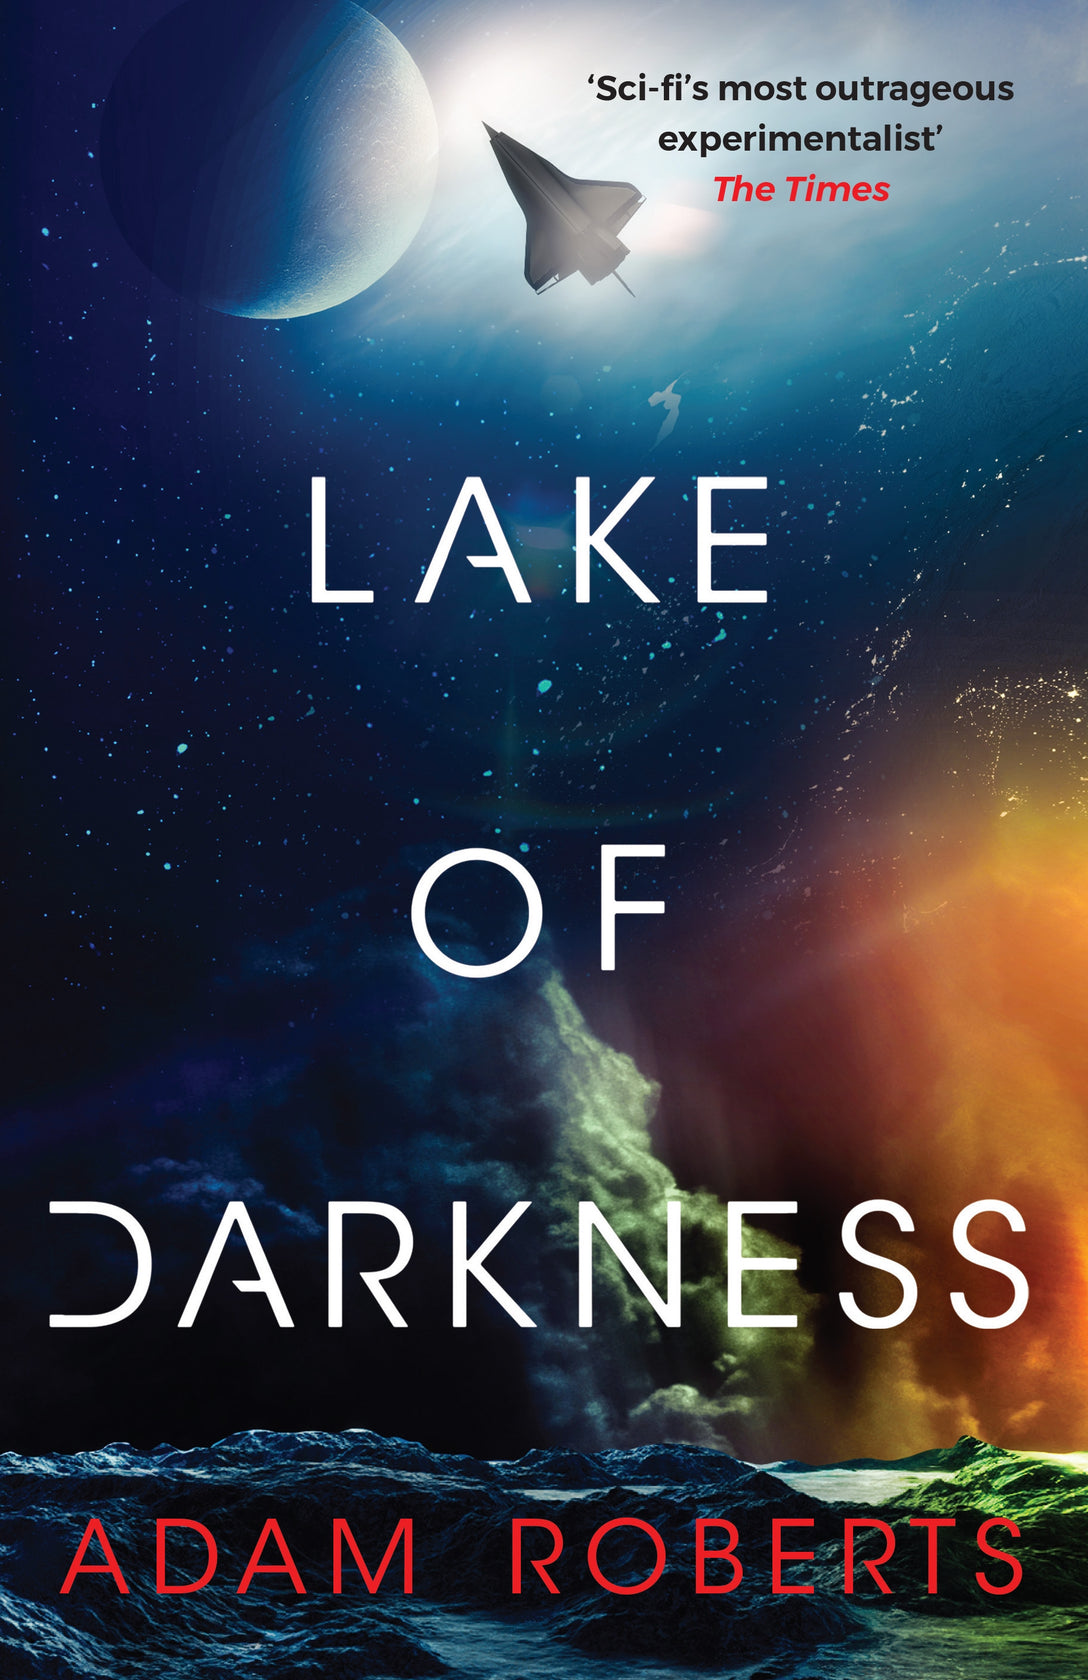 Lake of Darkness by Adam Roberts